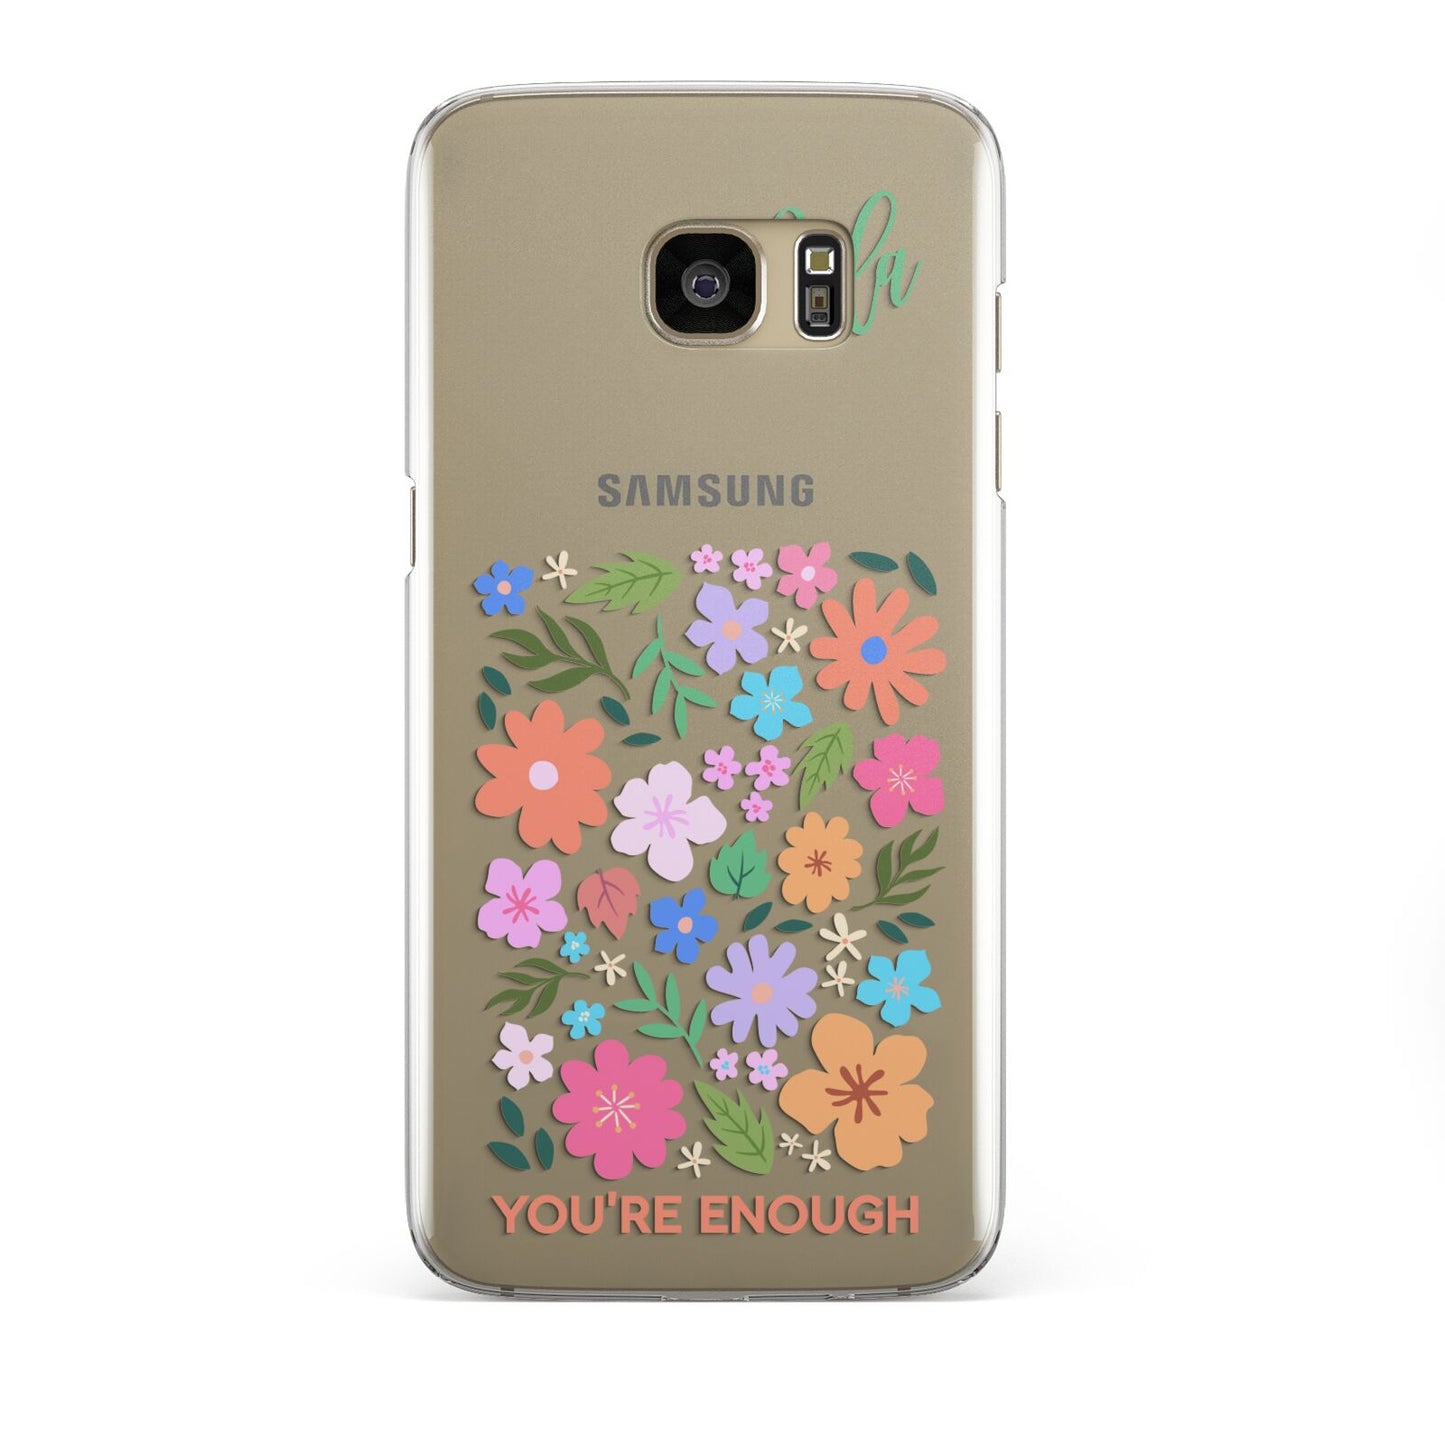 Floral Poster Samsung Galaxy S7 Edge Case